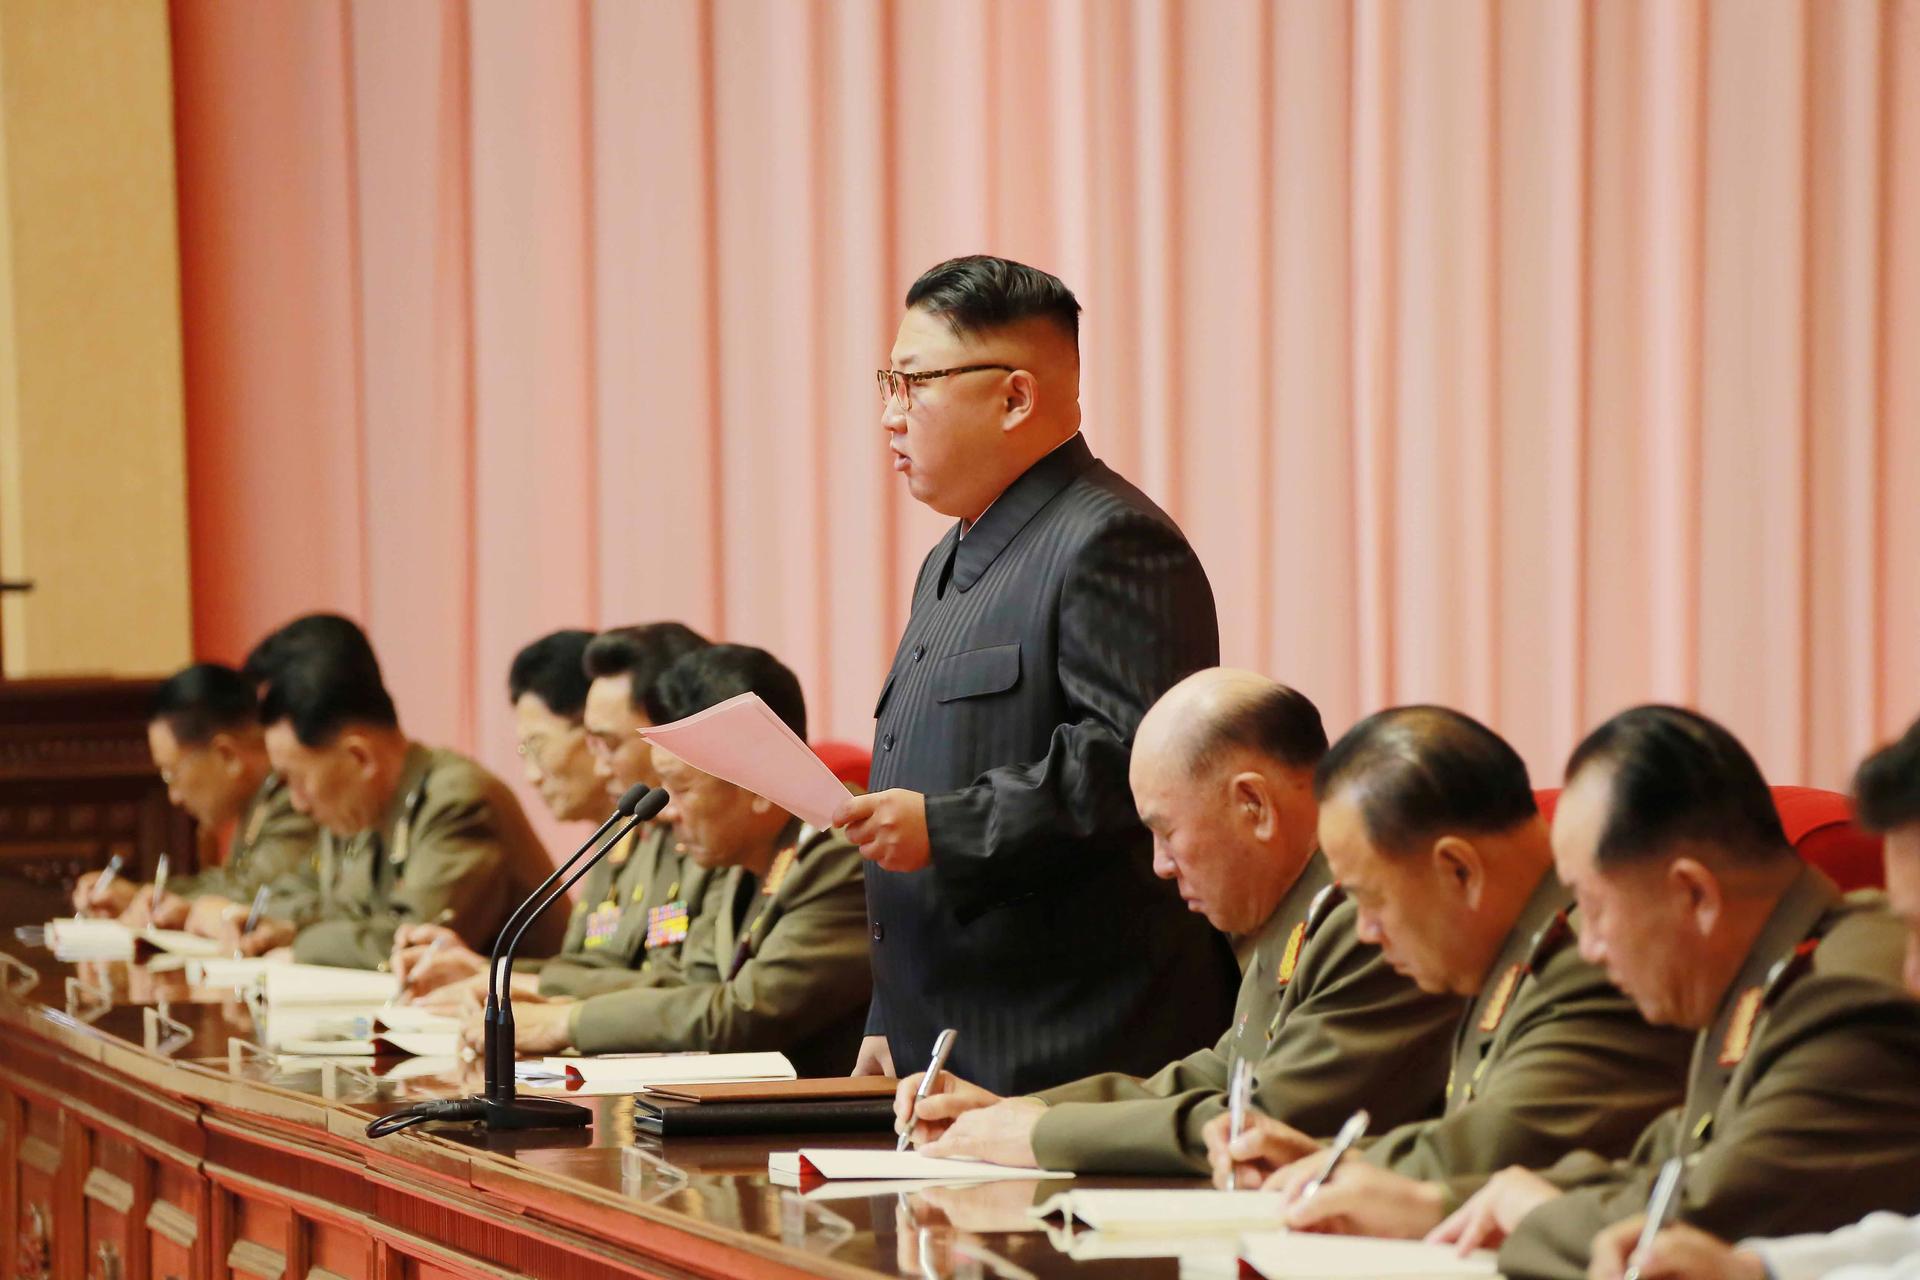 North Korean leader Kim Jong-un stands at a table in the middle of several military members .